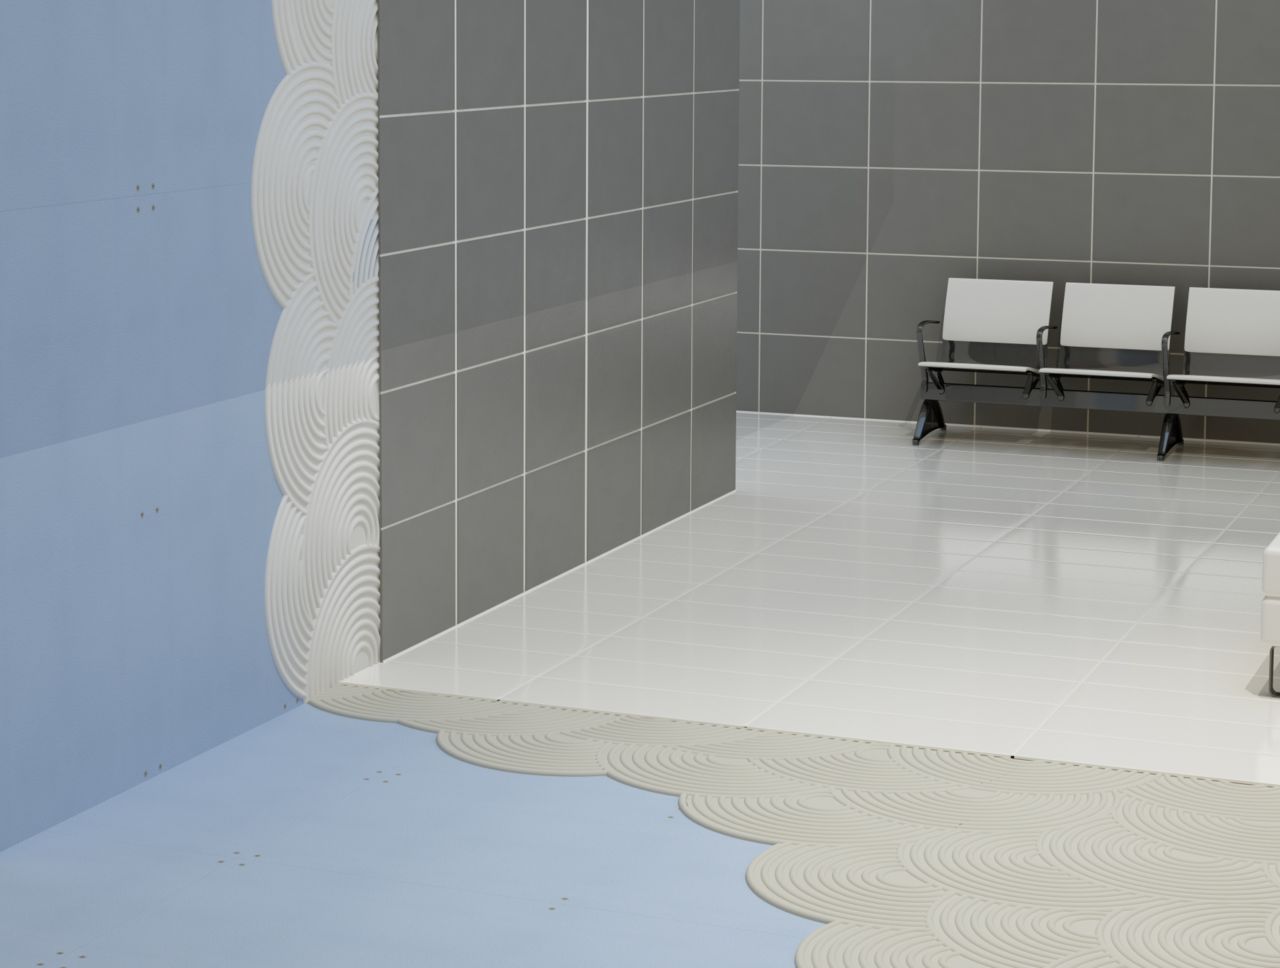 Illustration of tile setting adhesives and tiles on drywall in lobby with chairs